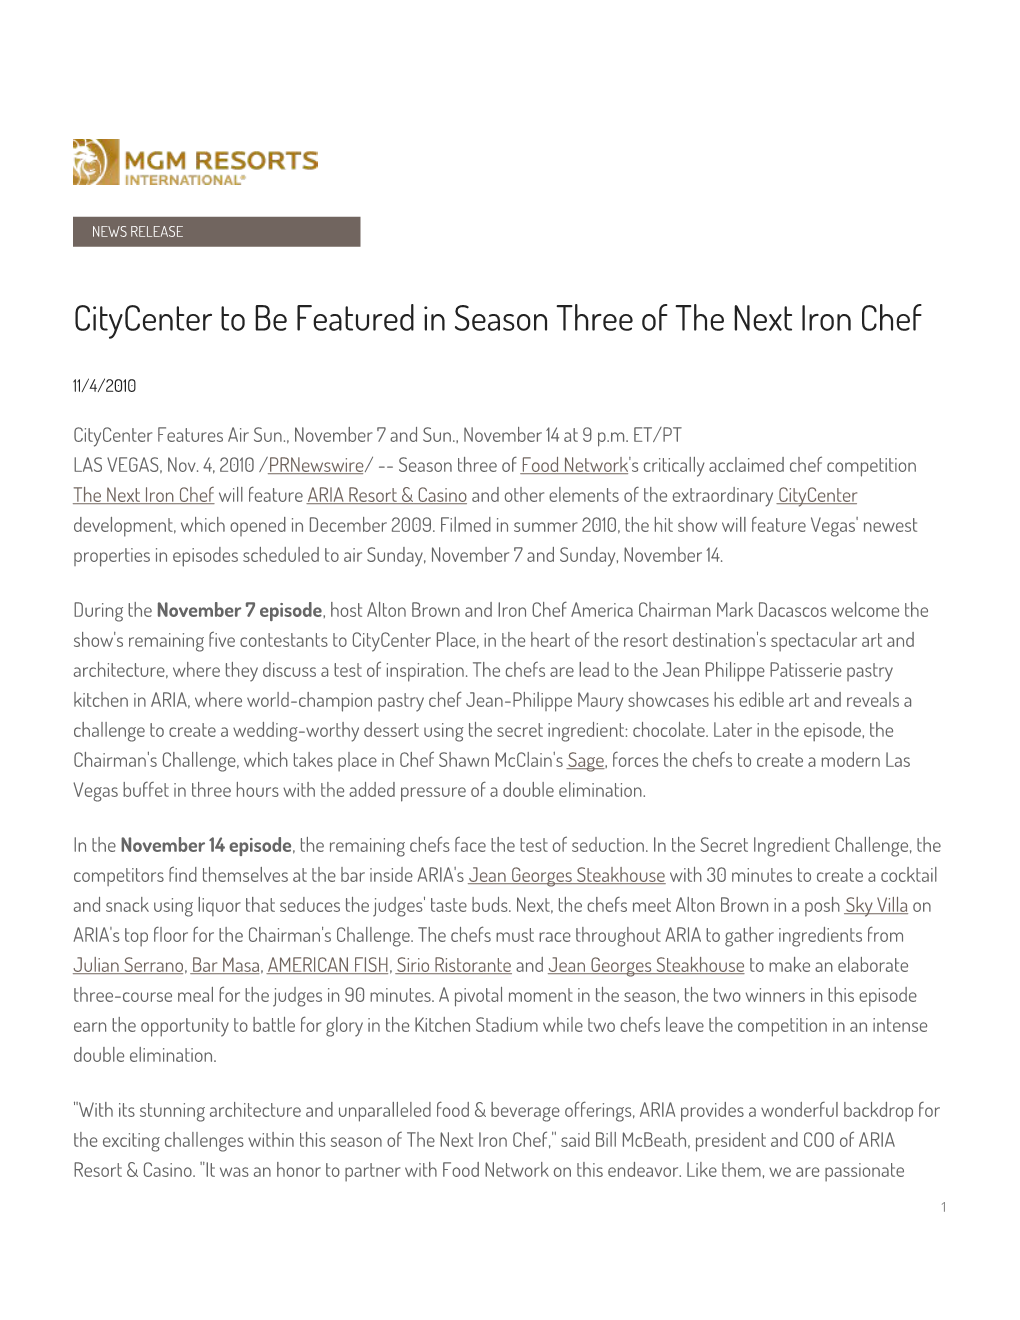 Citycenter to Be Featured in Season Three of the Next Iron Chef